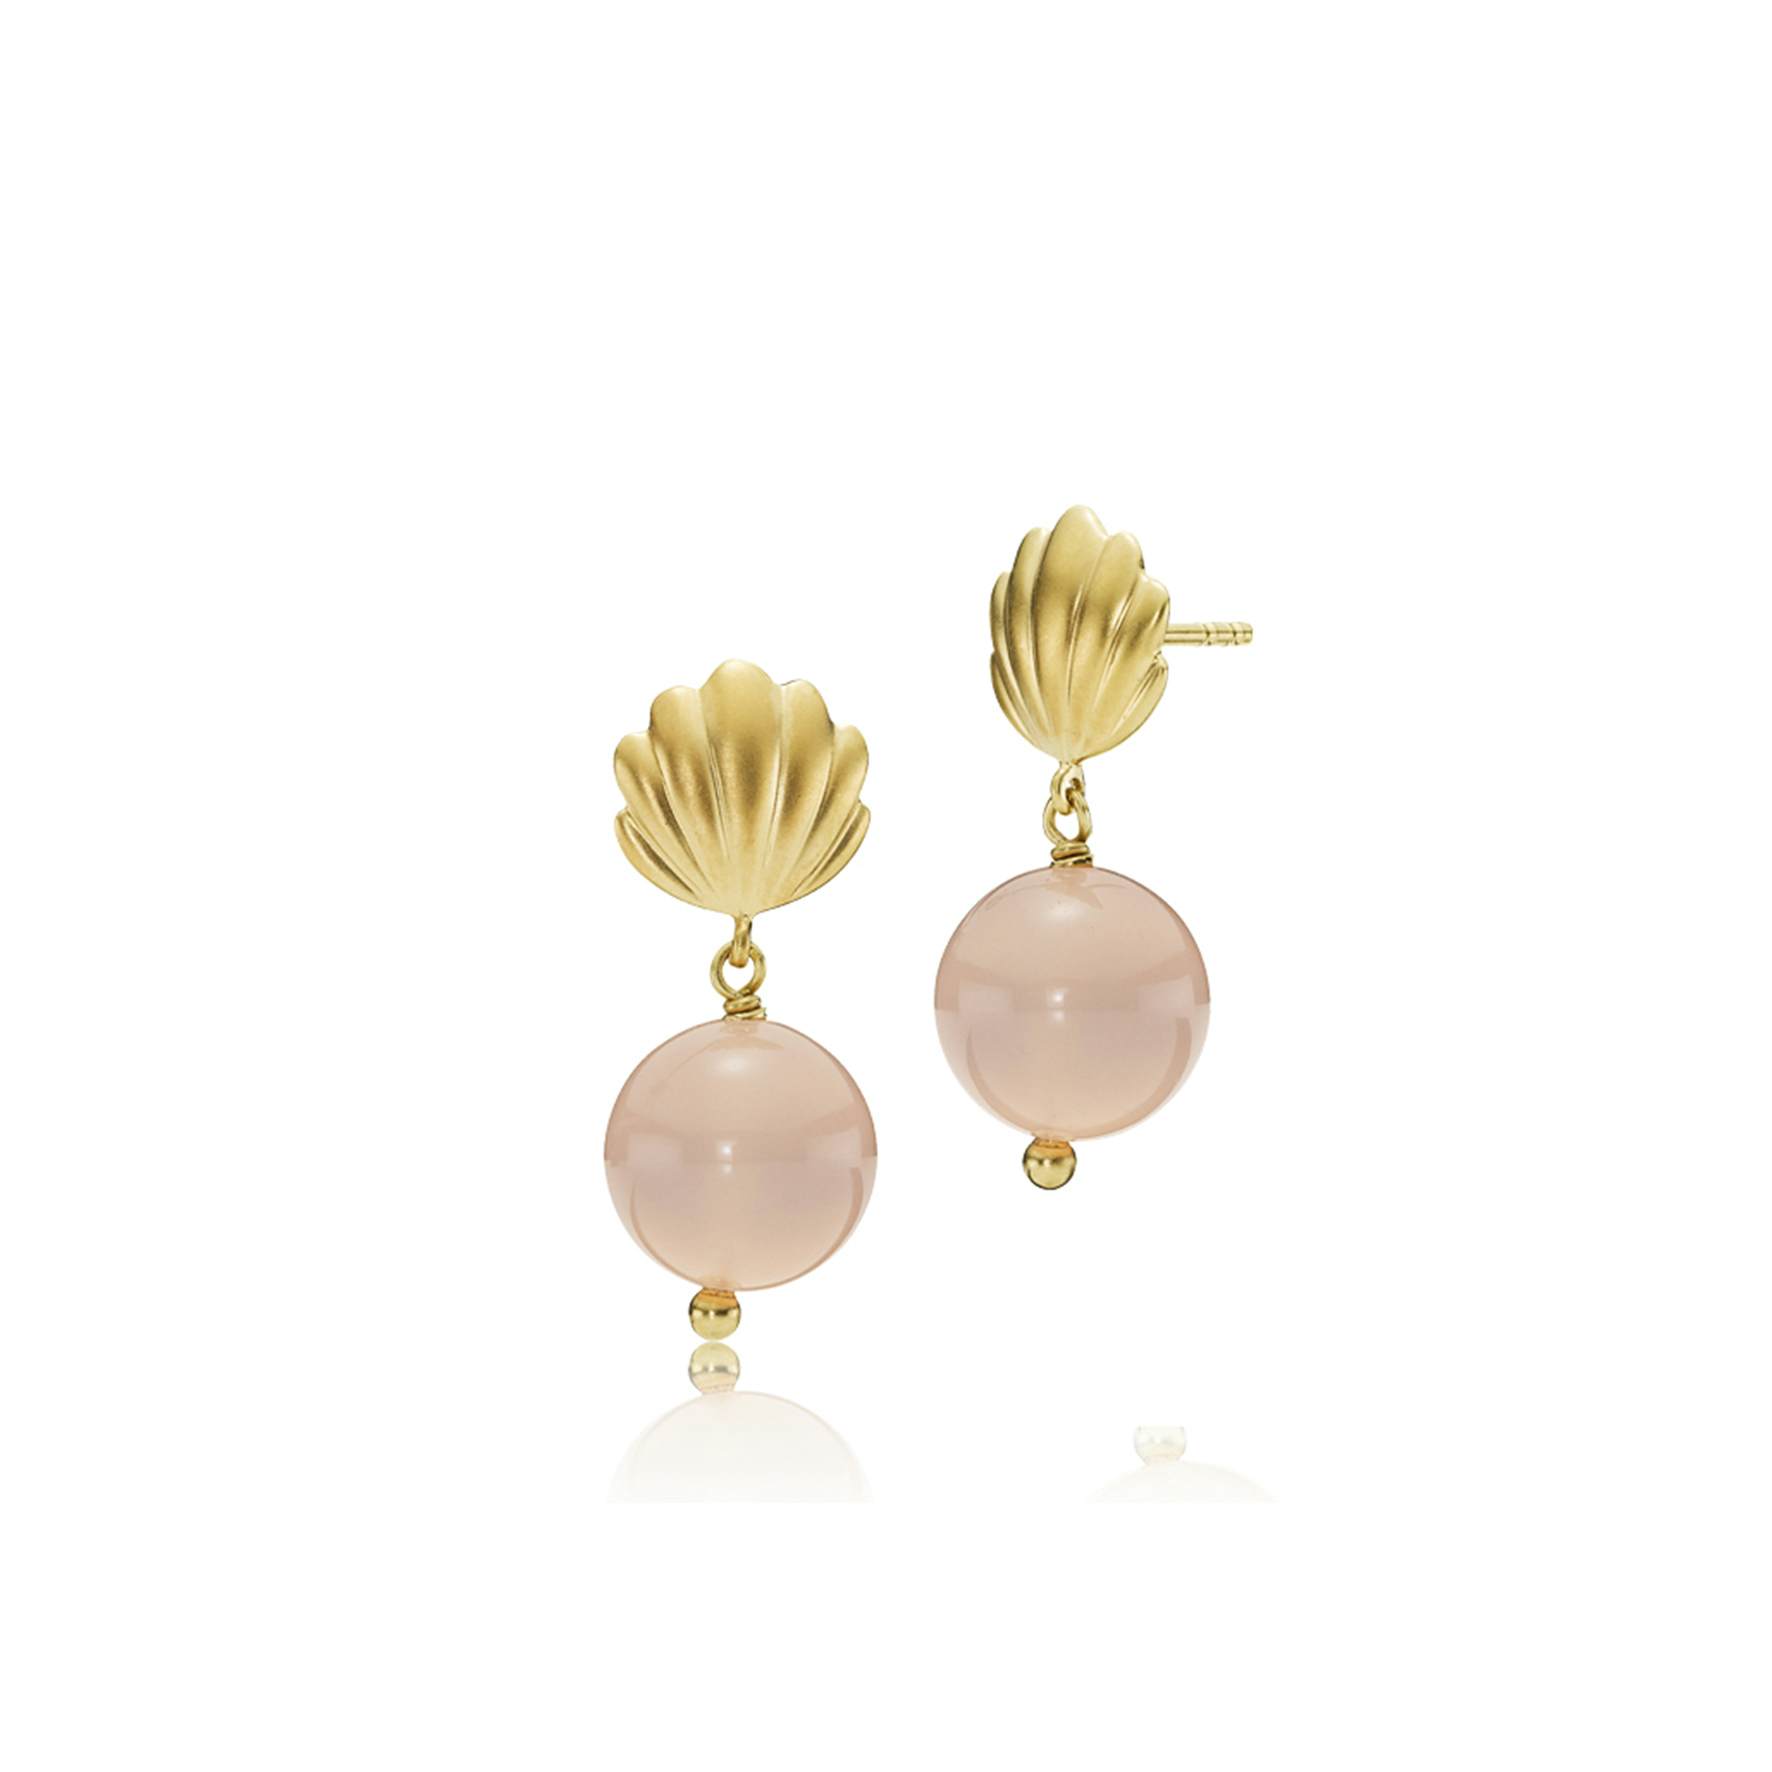 Isabella Pink Earrings from Izabel Camille in Goldplated-Silver Sterling 925